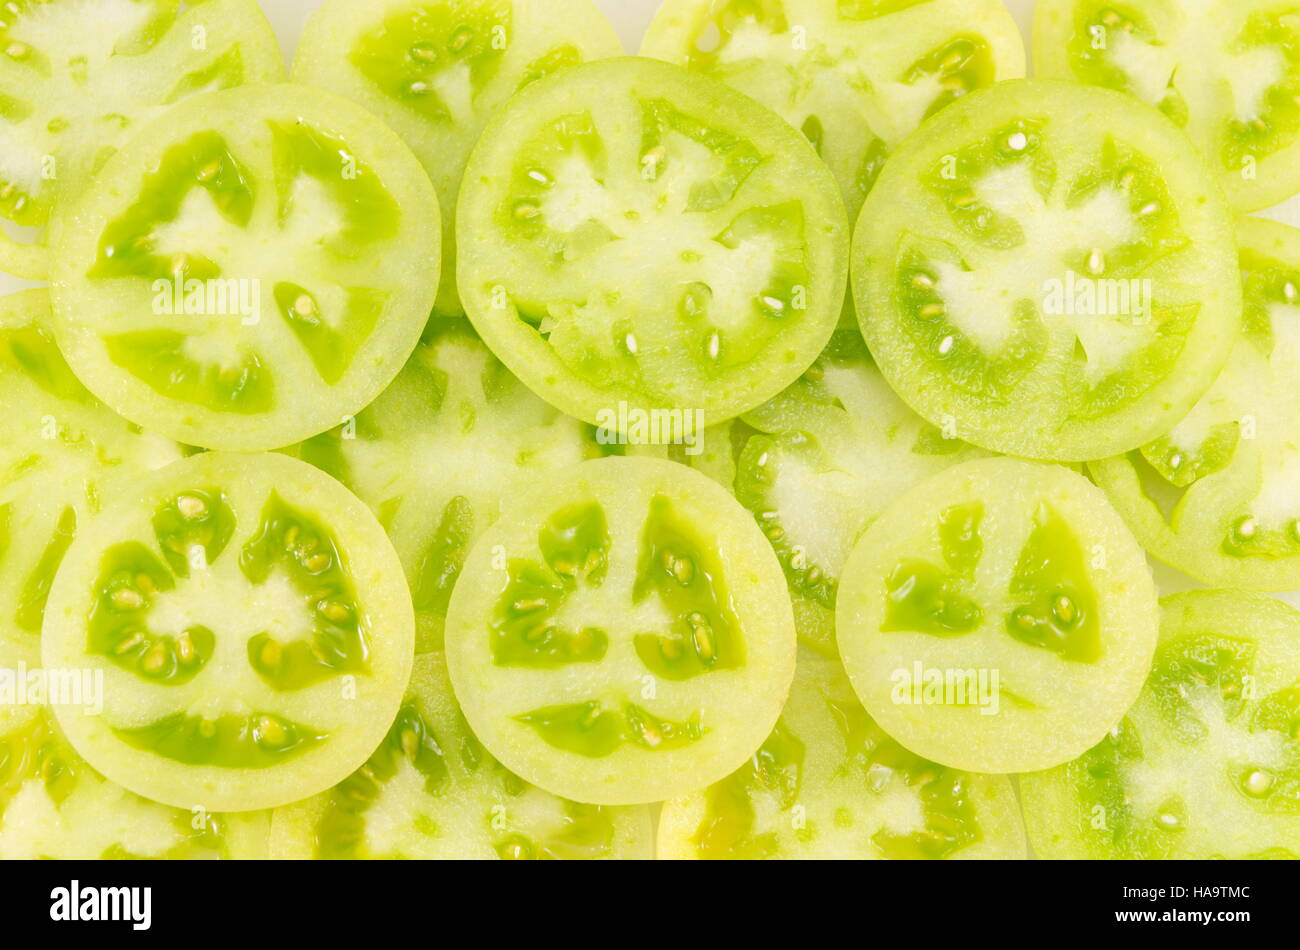 green tomatoes sliced into circles and arranged together next to a red tomato slice Stock Photo